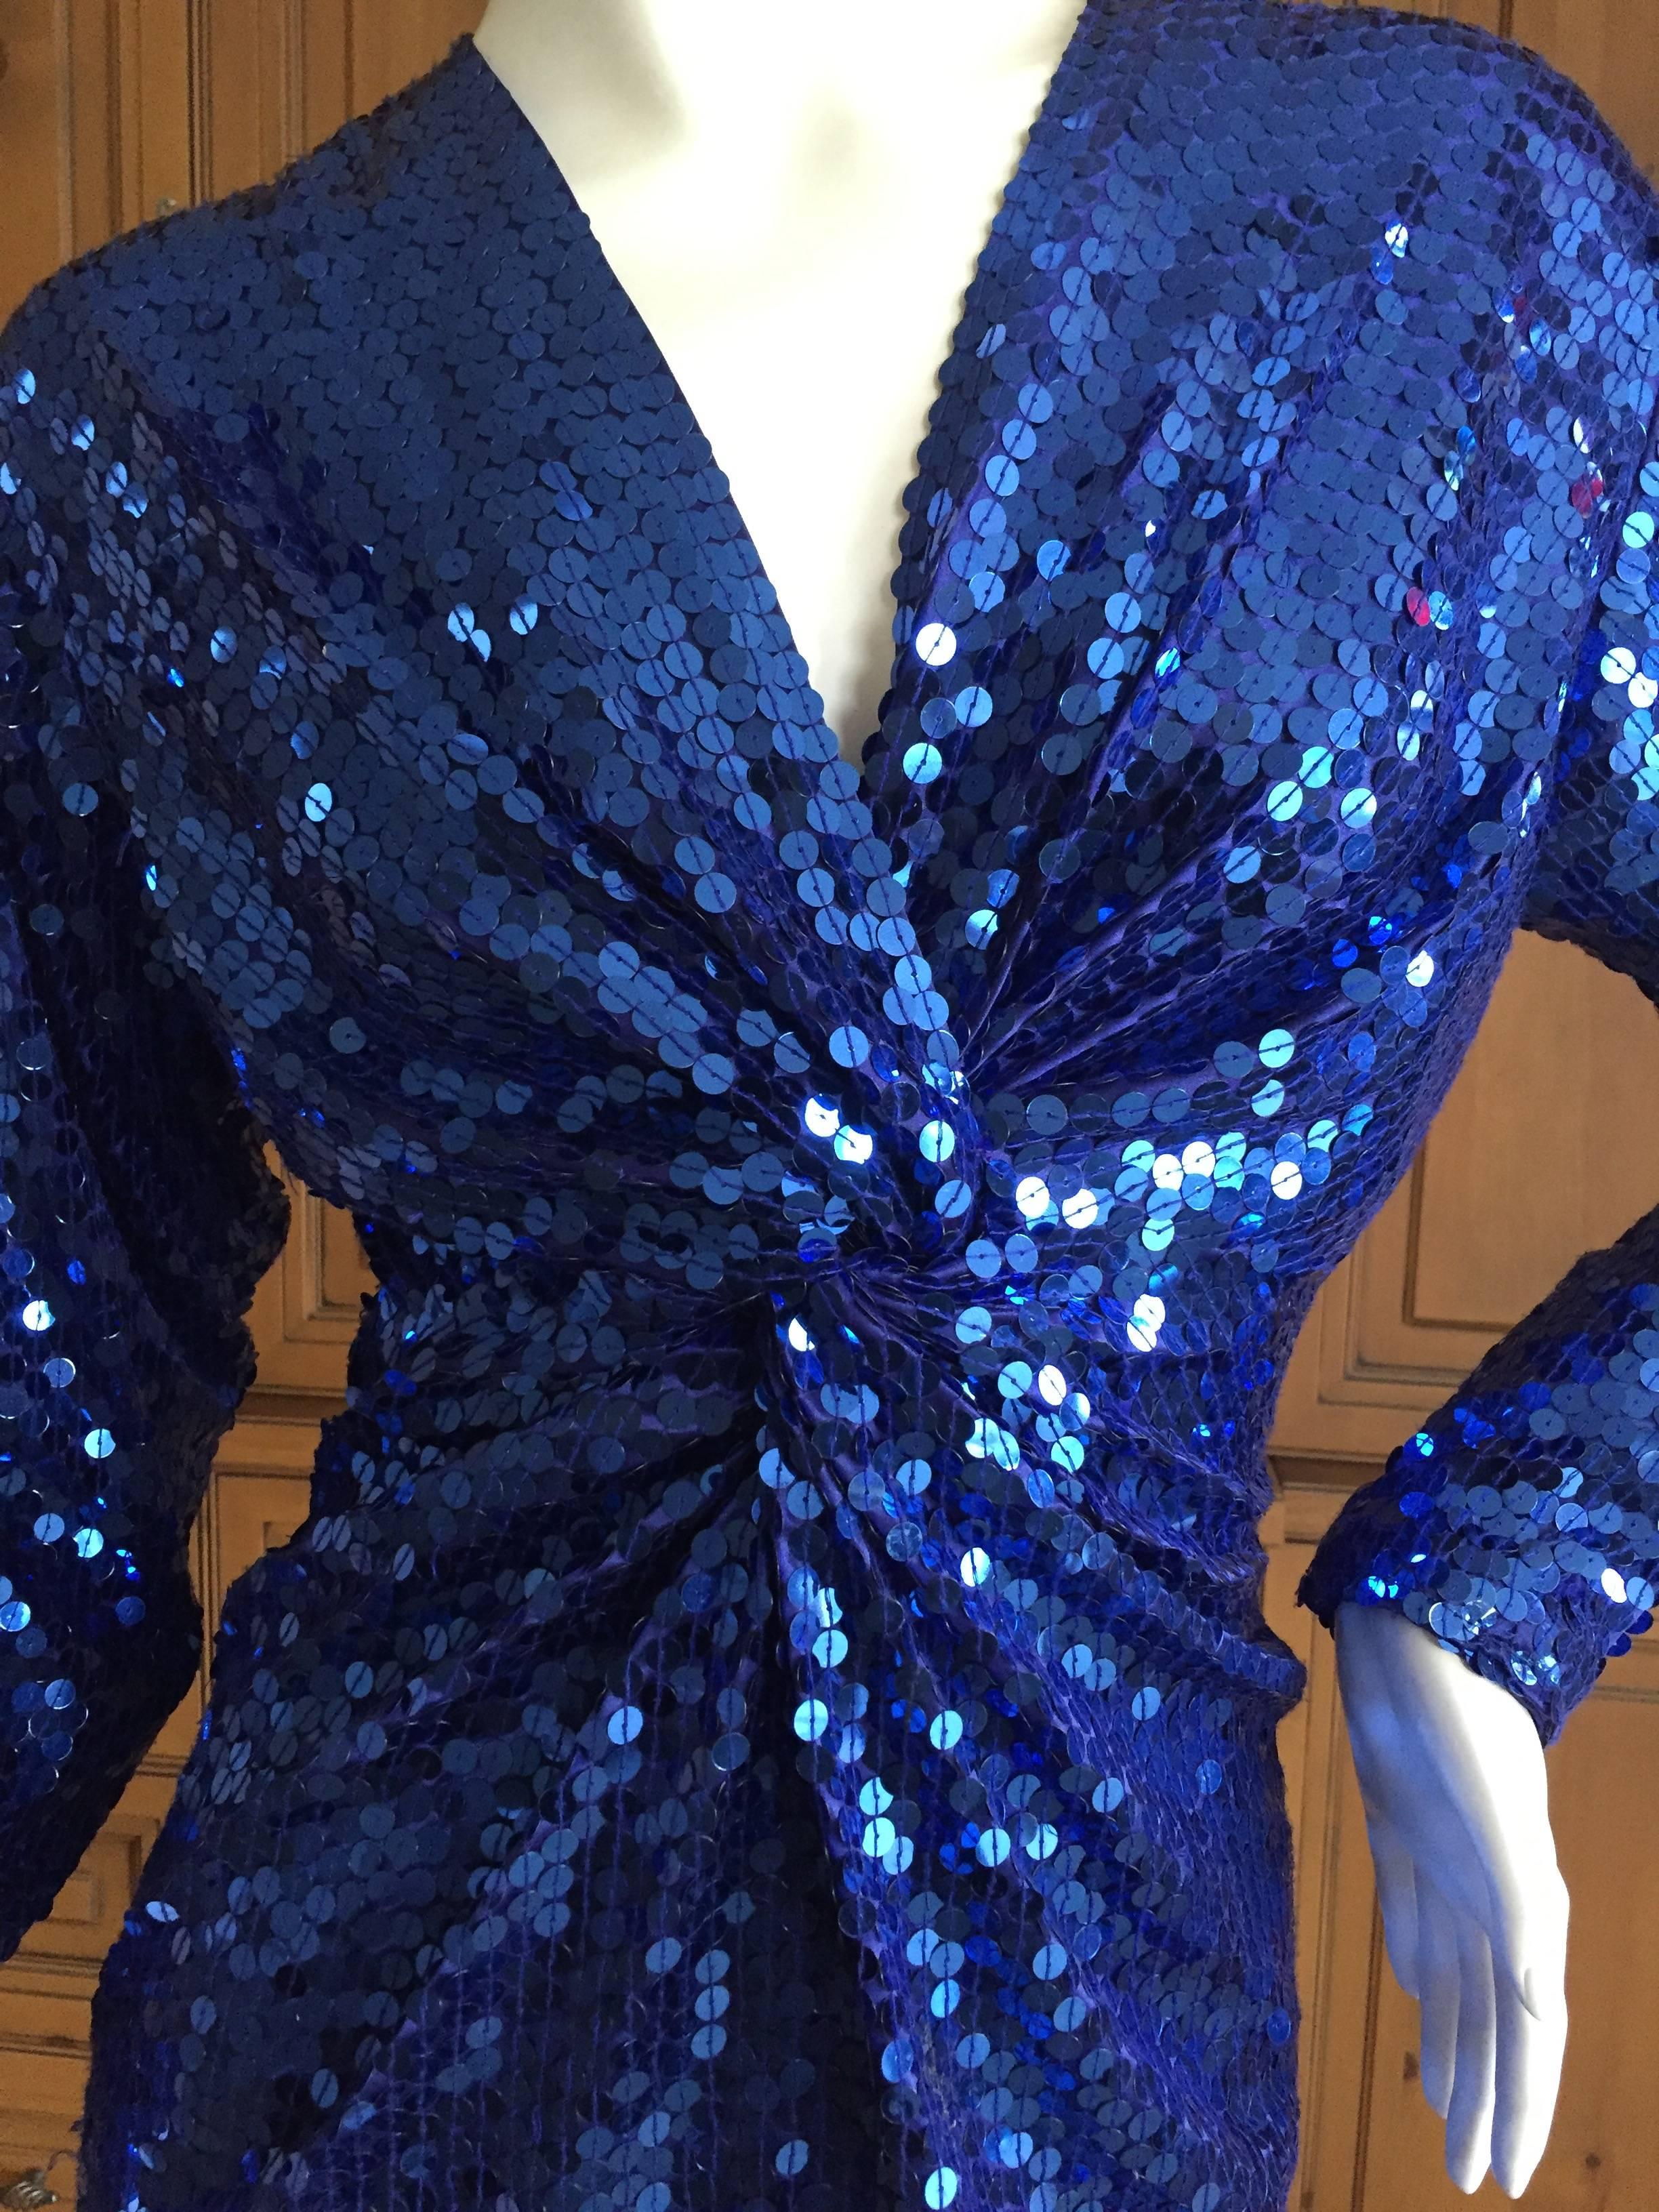 Oleg Cassini 1970's Sequin Disco Era Dress.
This is such a classic example of disco dressing, with a knot at the bust.
Vintage size 4
Bust 38"
Waist 30"
Hips 40"
Length 58"
Excellent condition